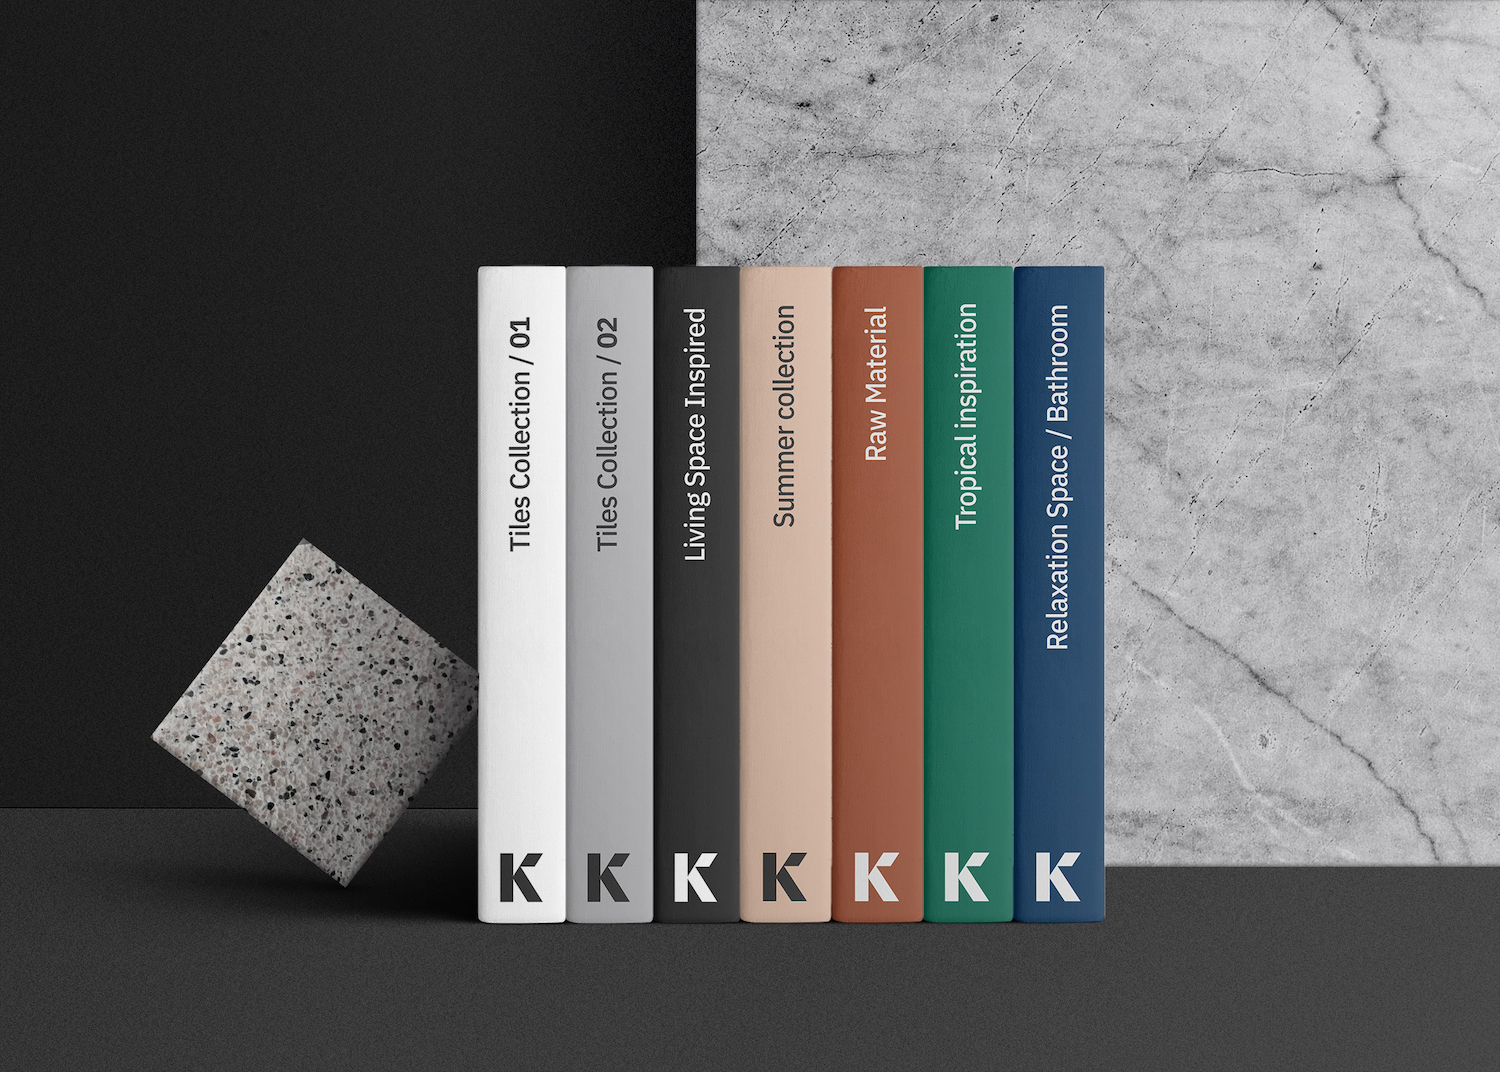 Artifact from the branding project for Kolek by Bracom Agency